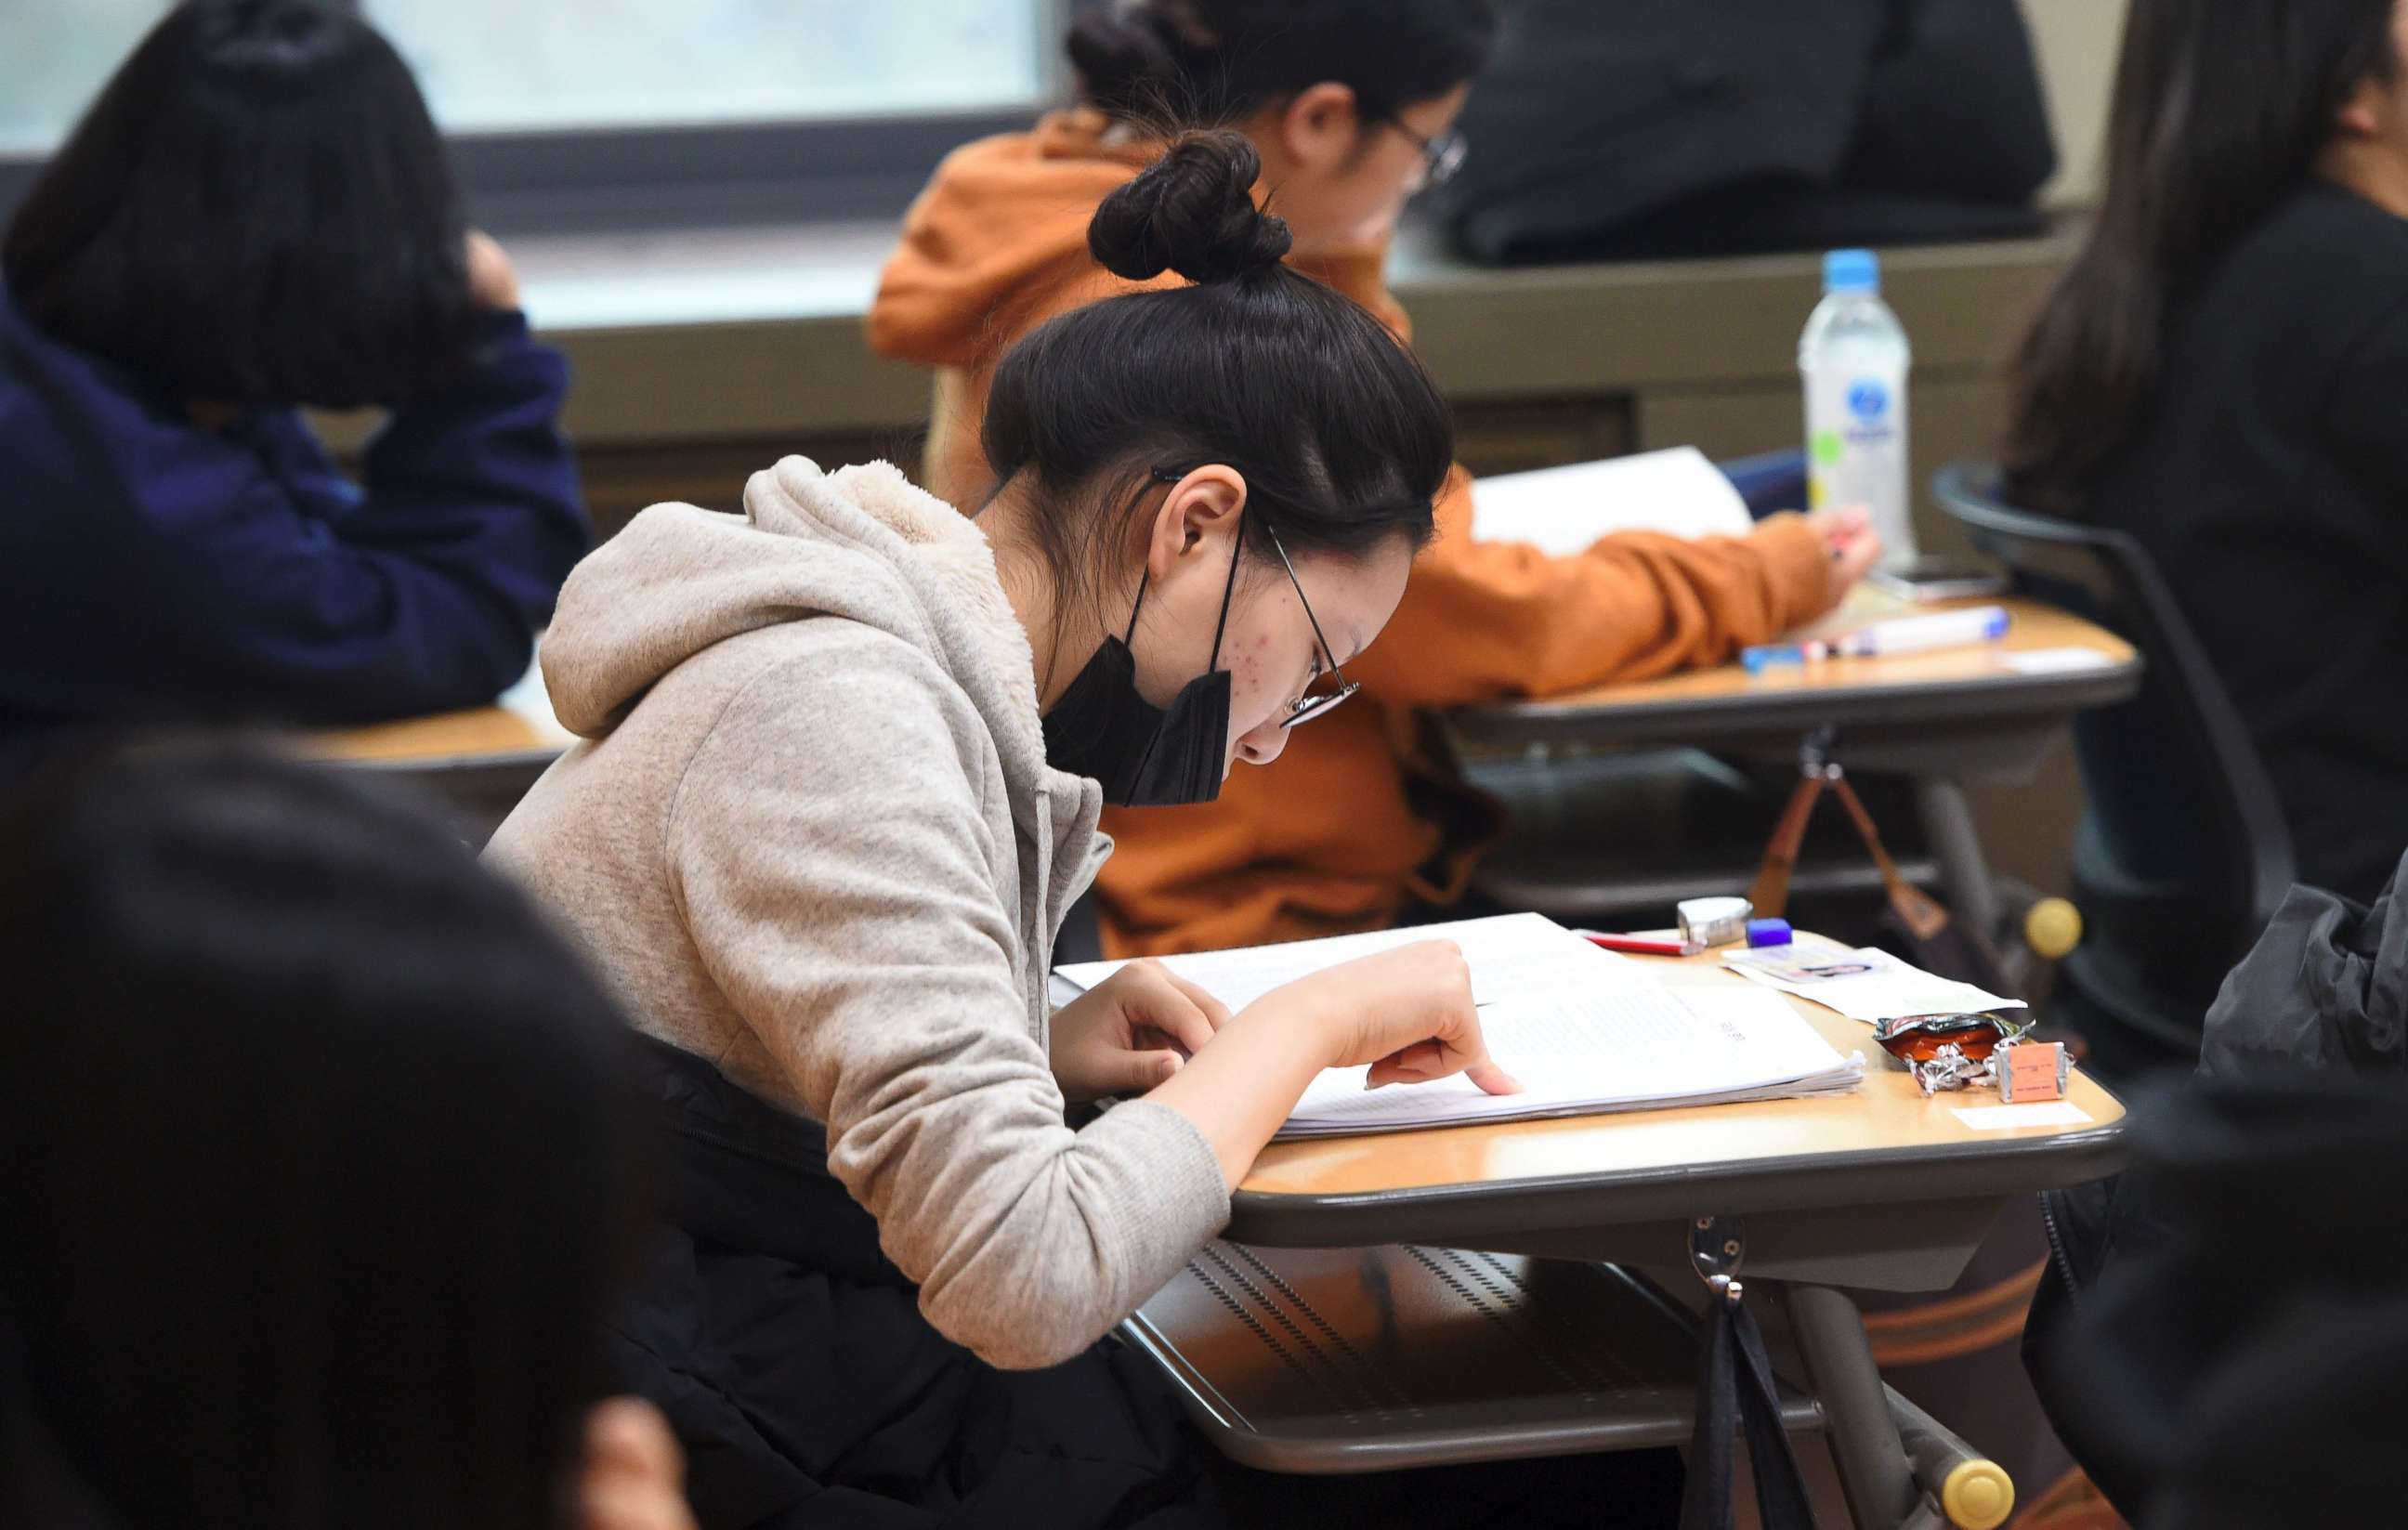 PHOTO: Students prepare to take the annual College Scholastic Ability Test, a standardized exam for college entrance, at a high school in Seoul on Nov. 23, 2017.